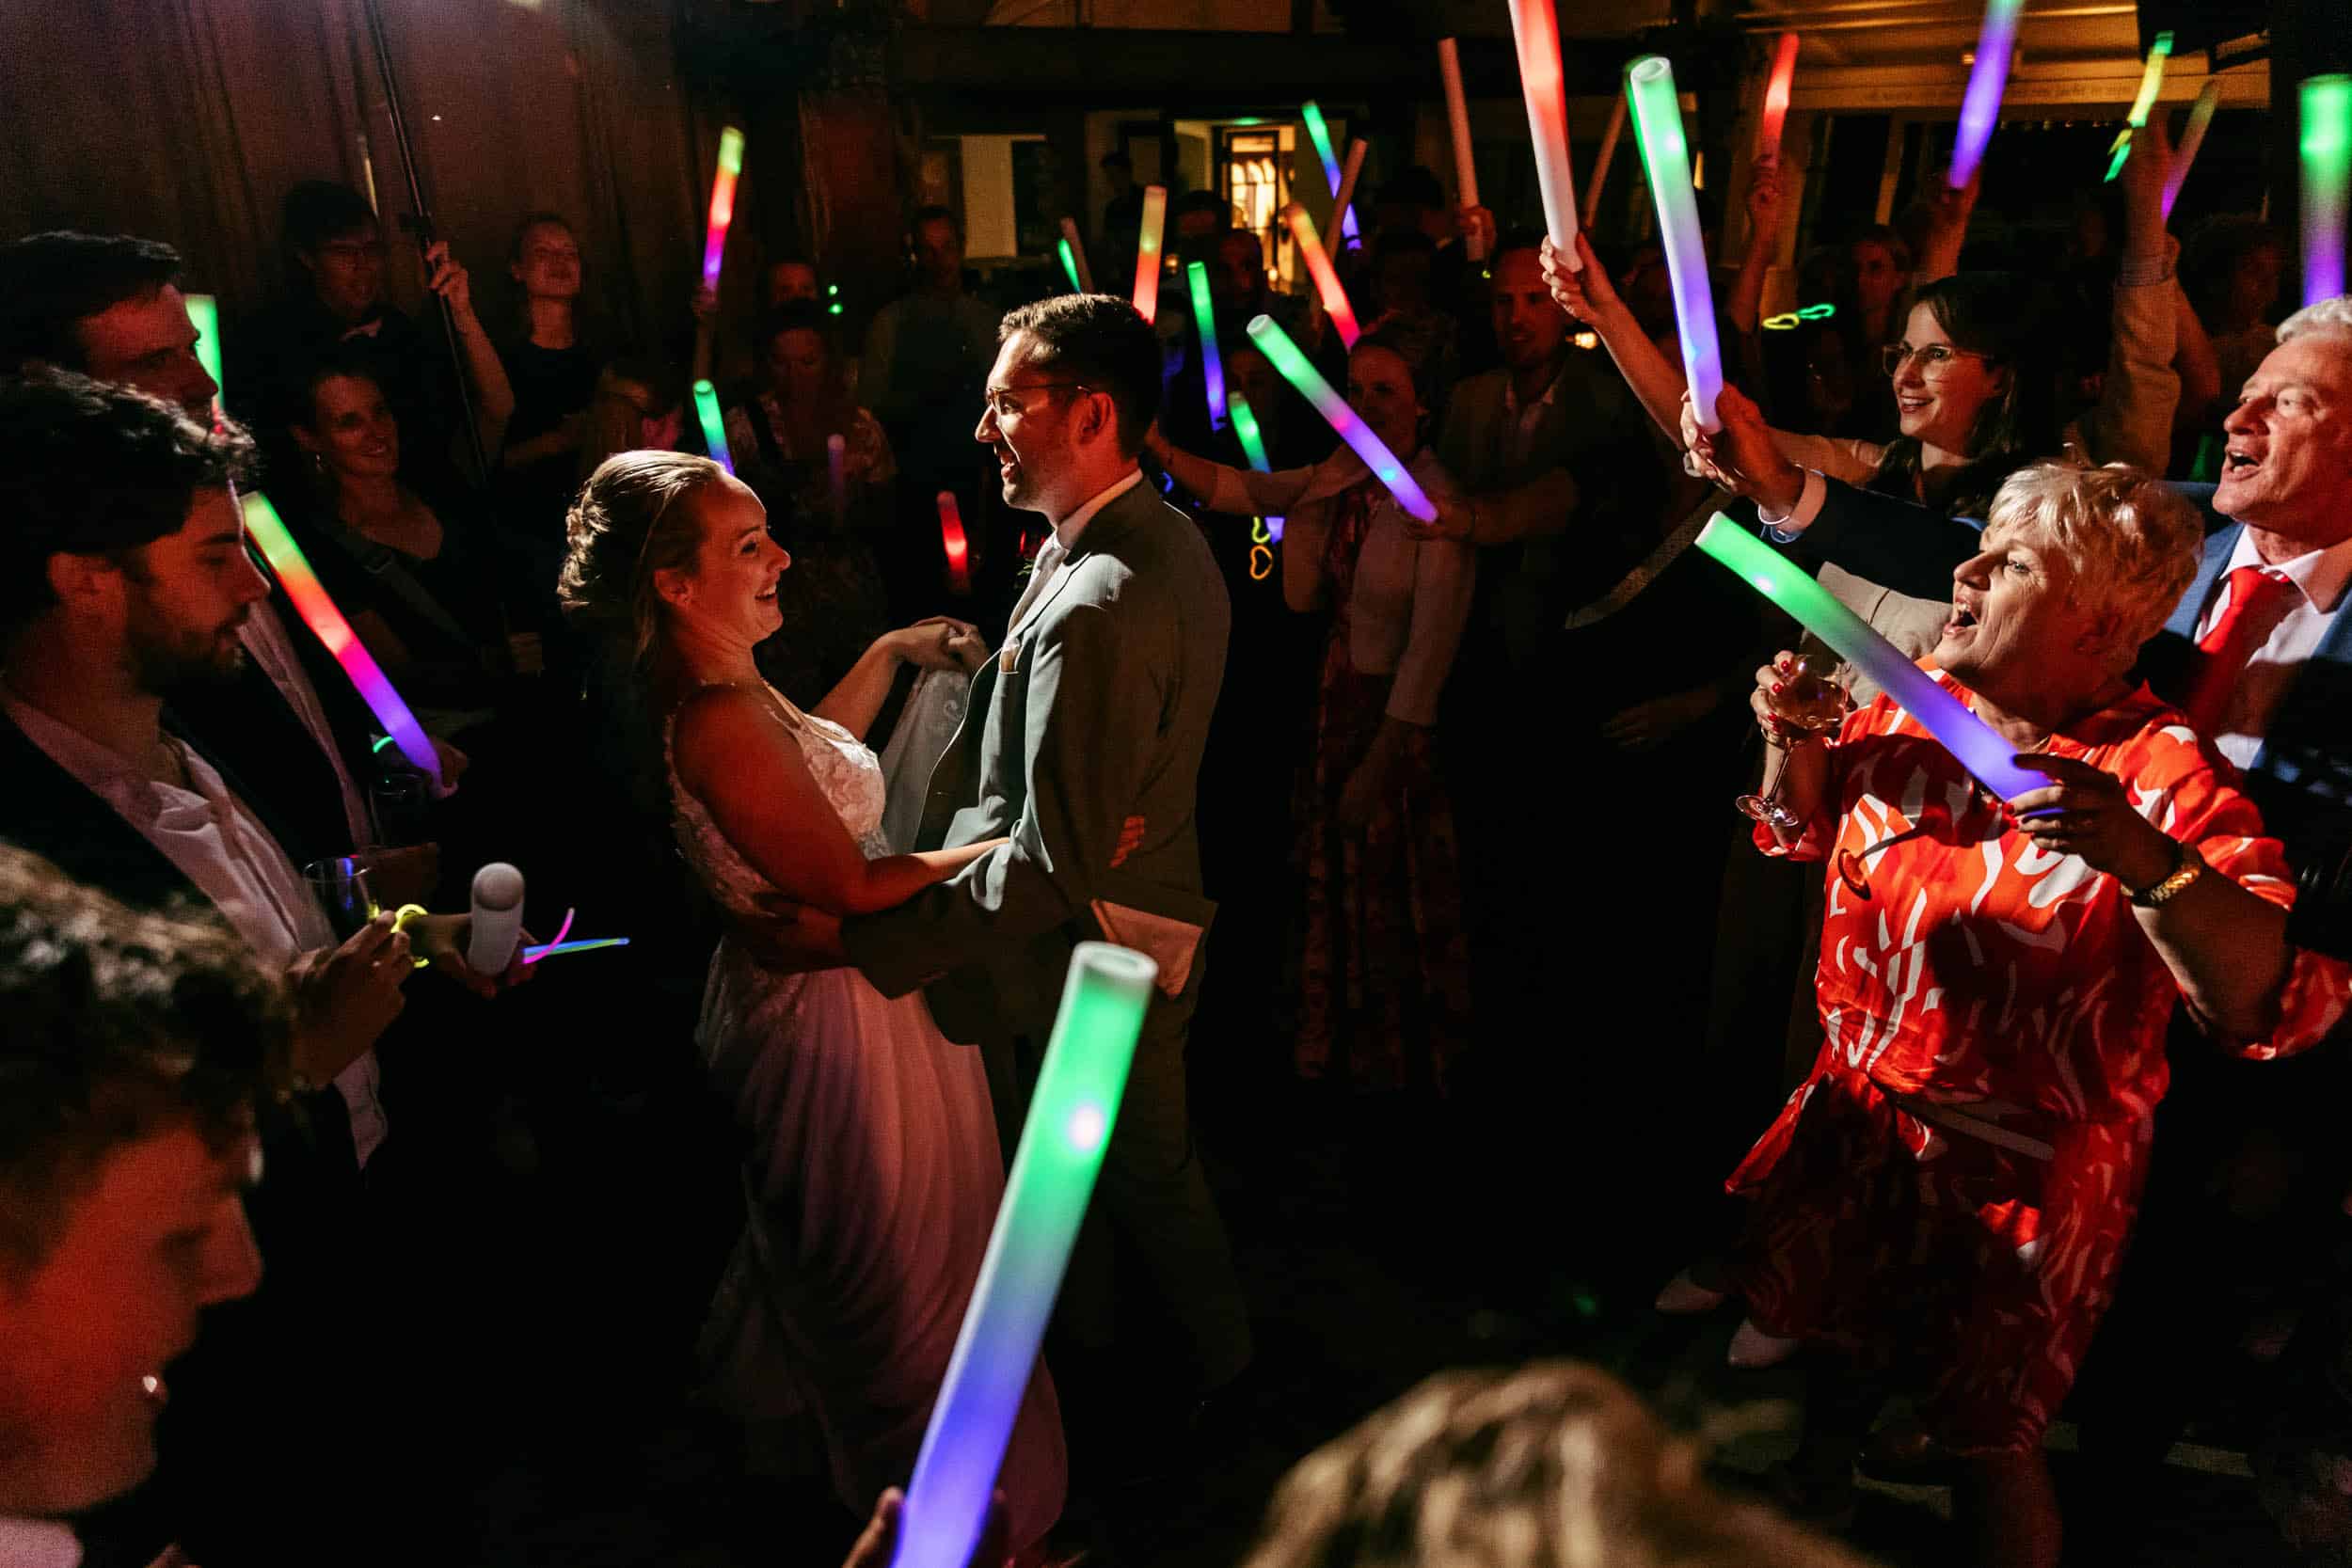 A bride and groom dance with lightsabers at their wedding.